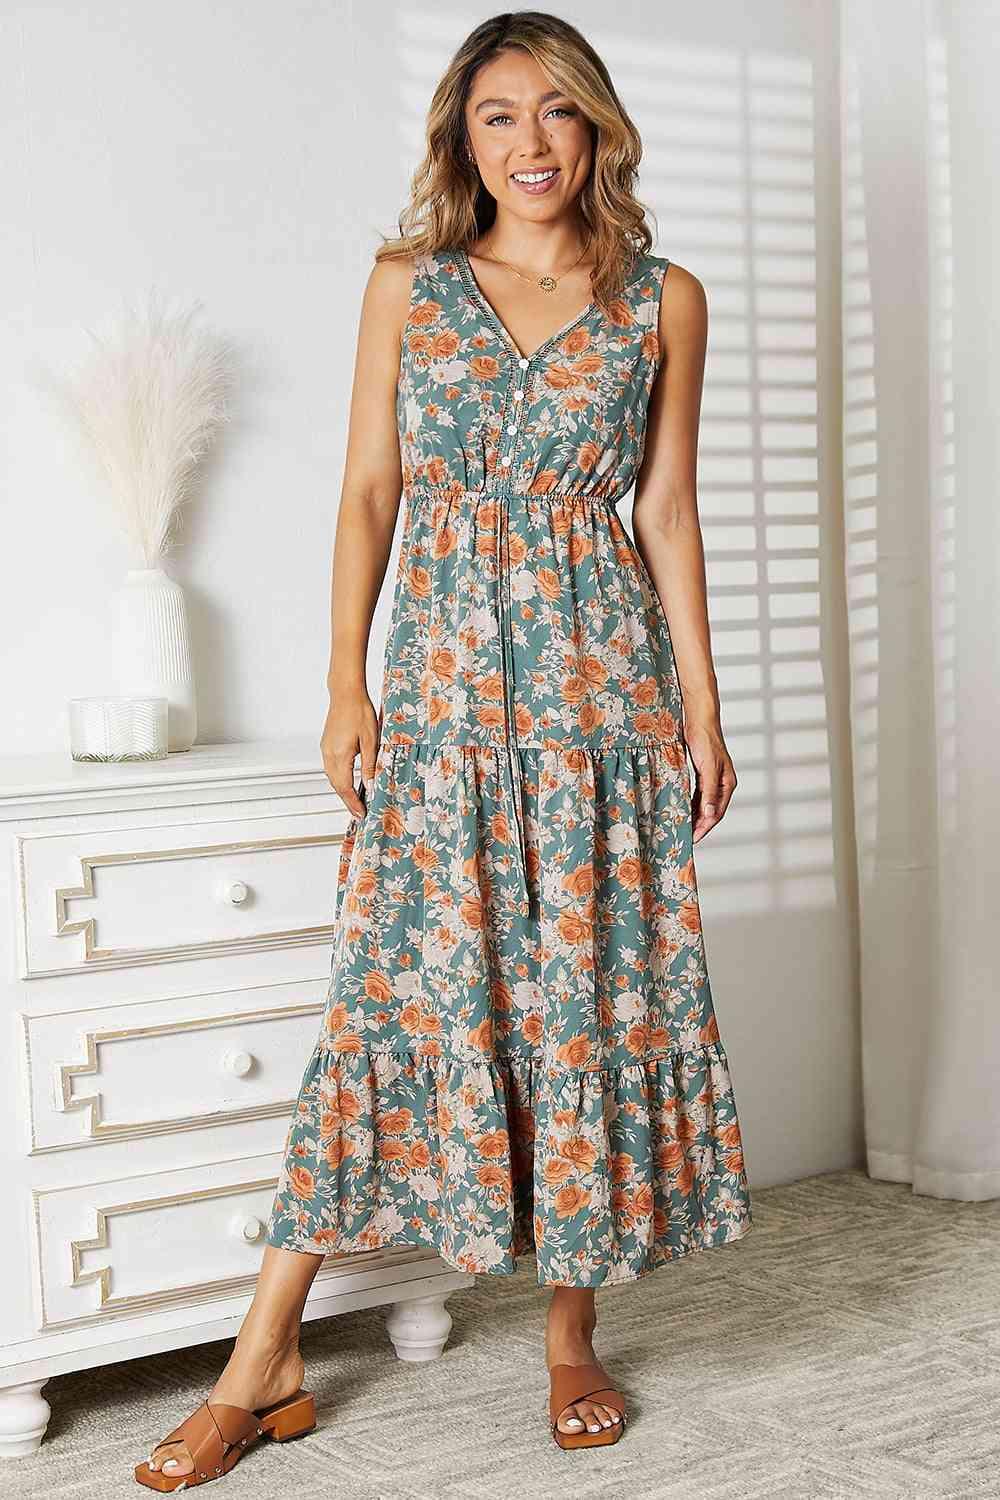 Double Take Floral V-Neck Tiered Sleeveless Dress - AMIClubwear